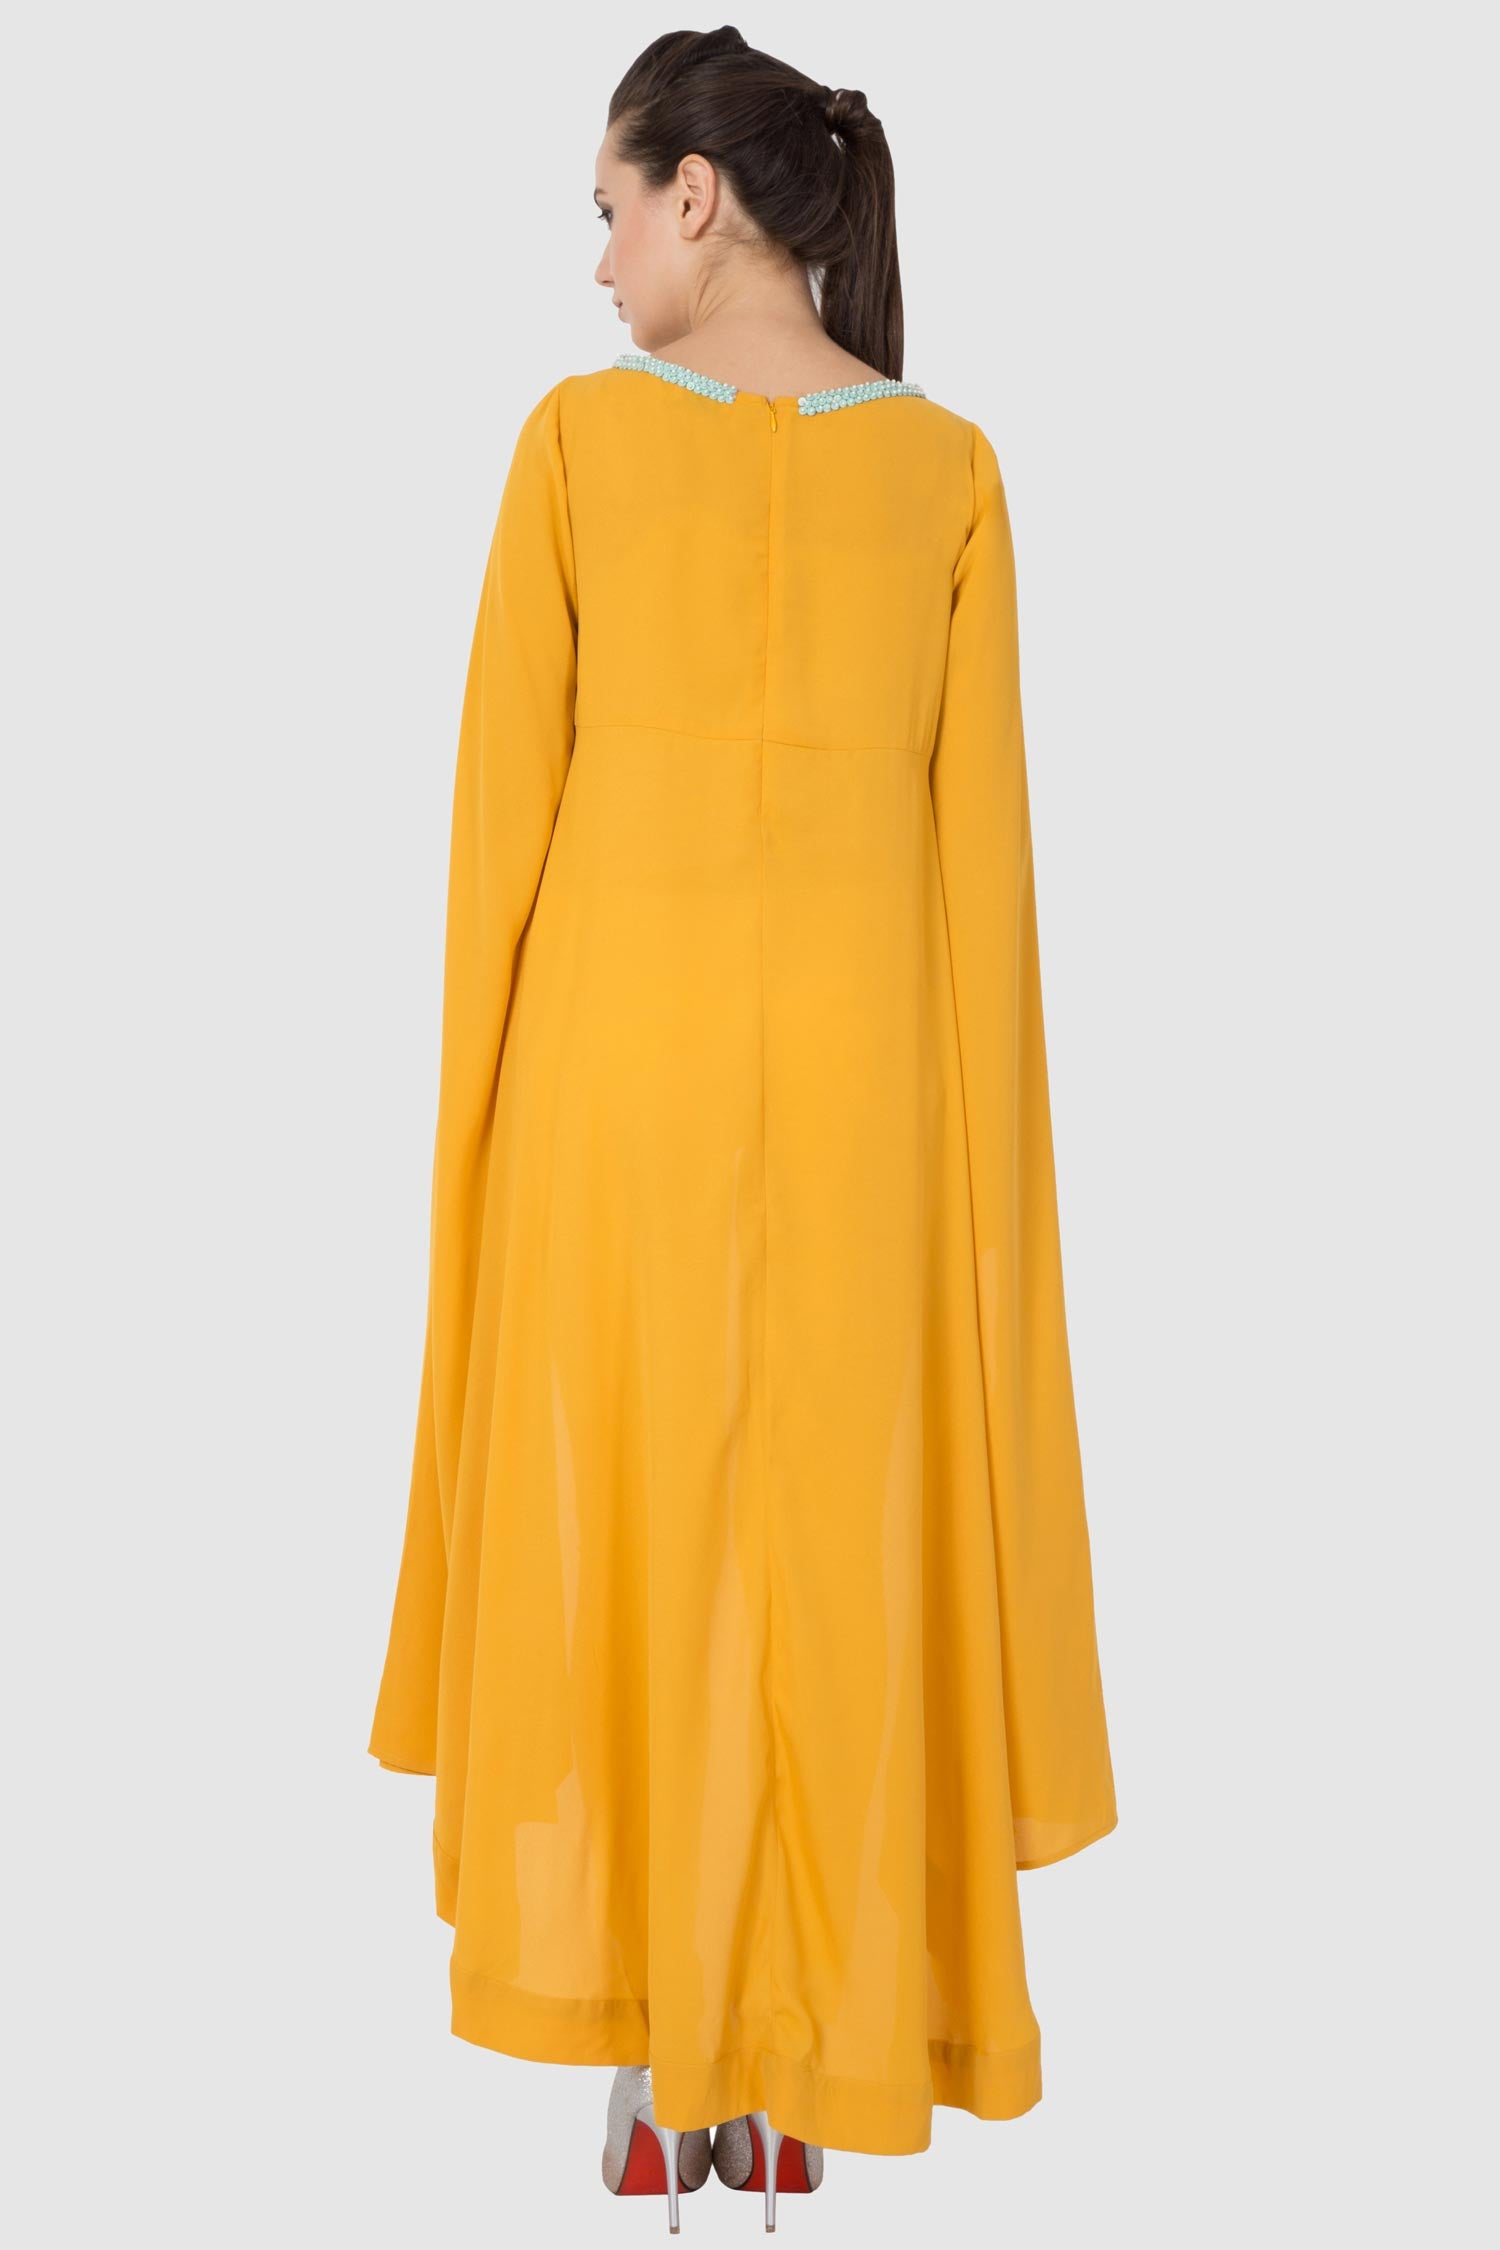 Yellow Boat Neck High Low Tunic